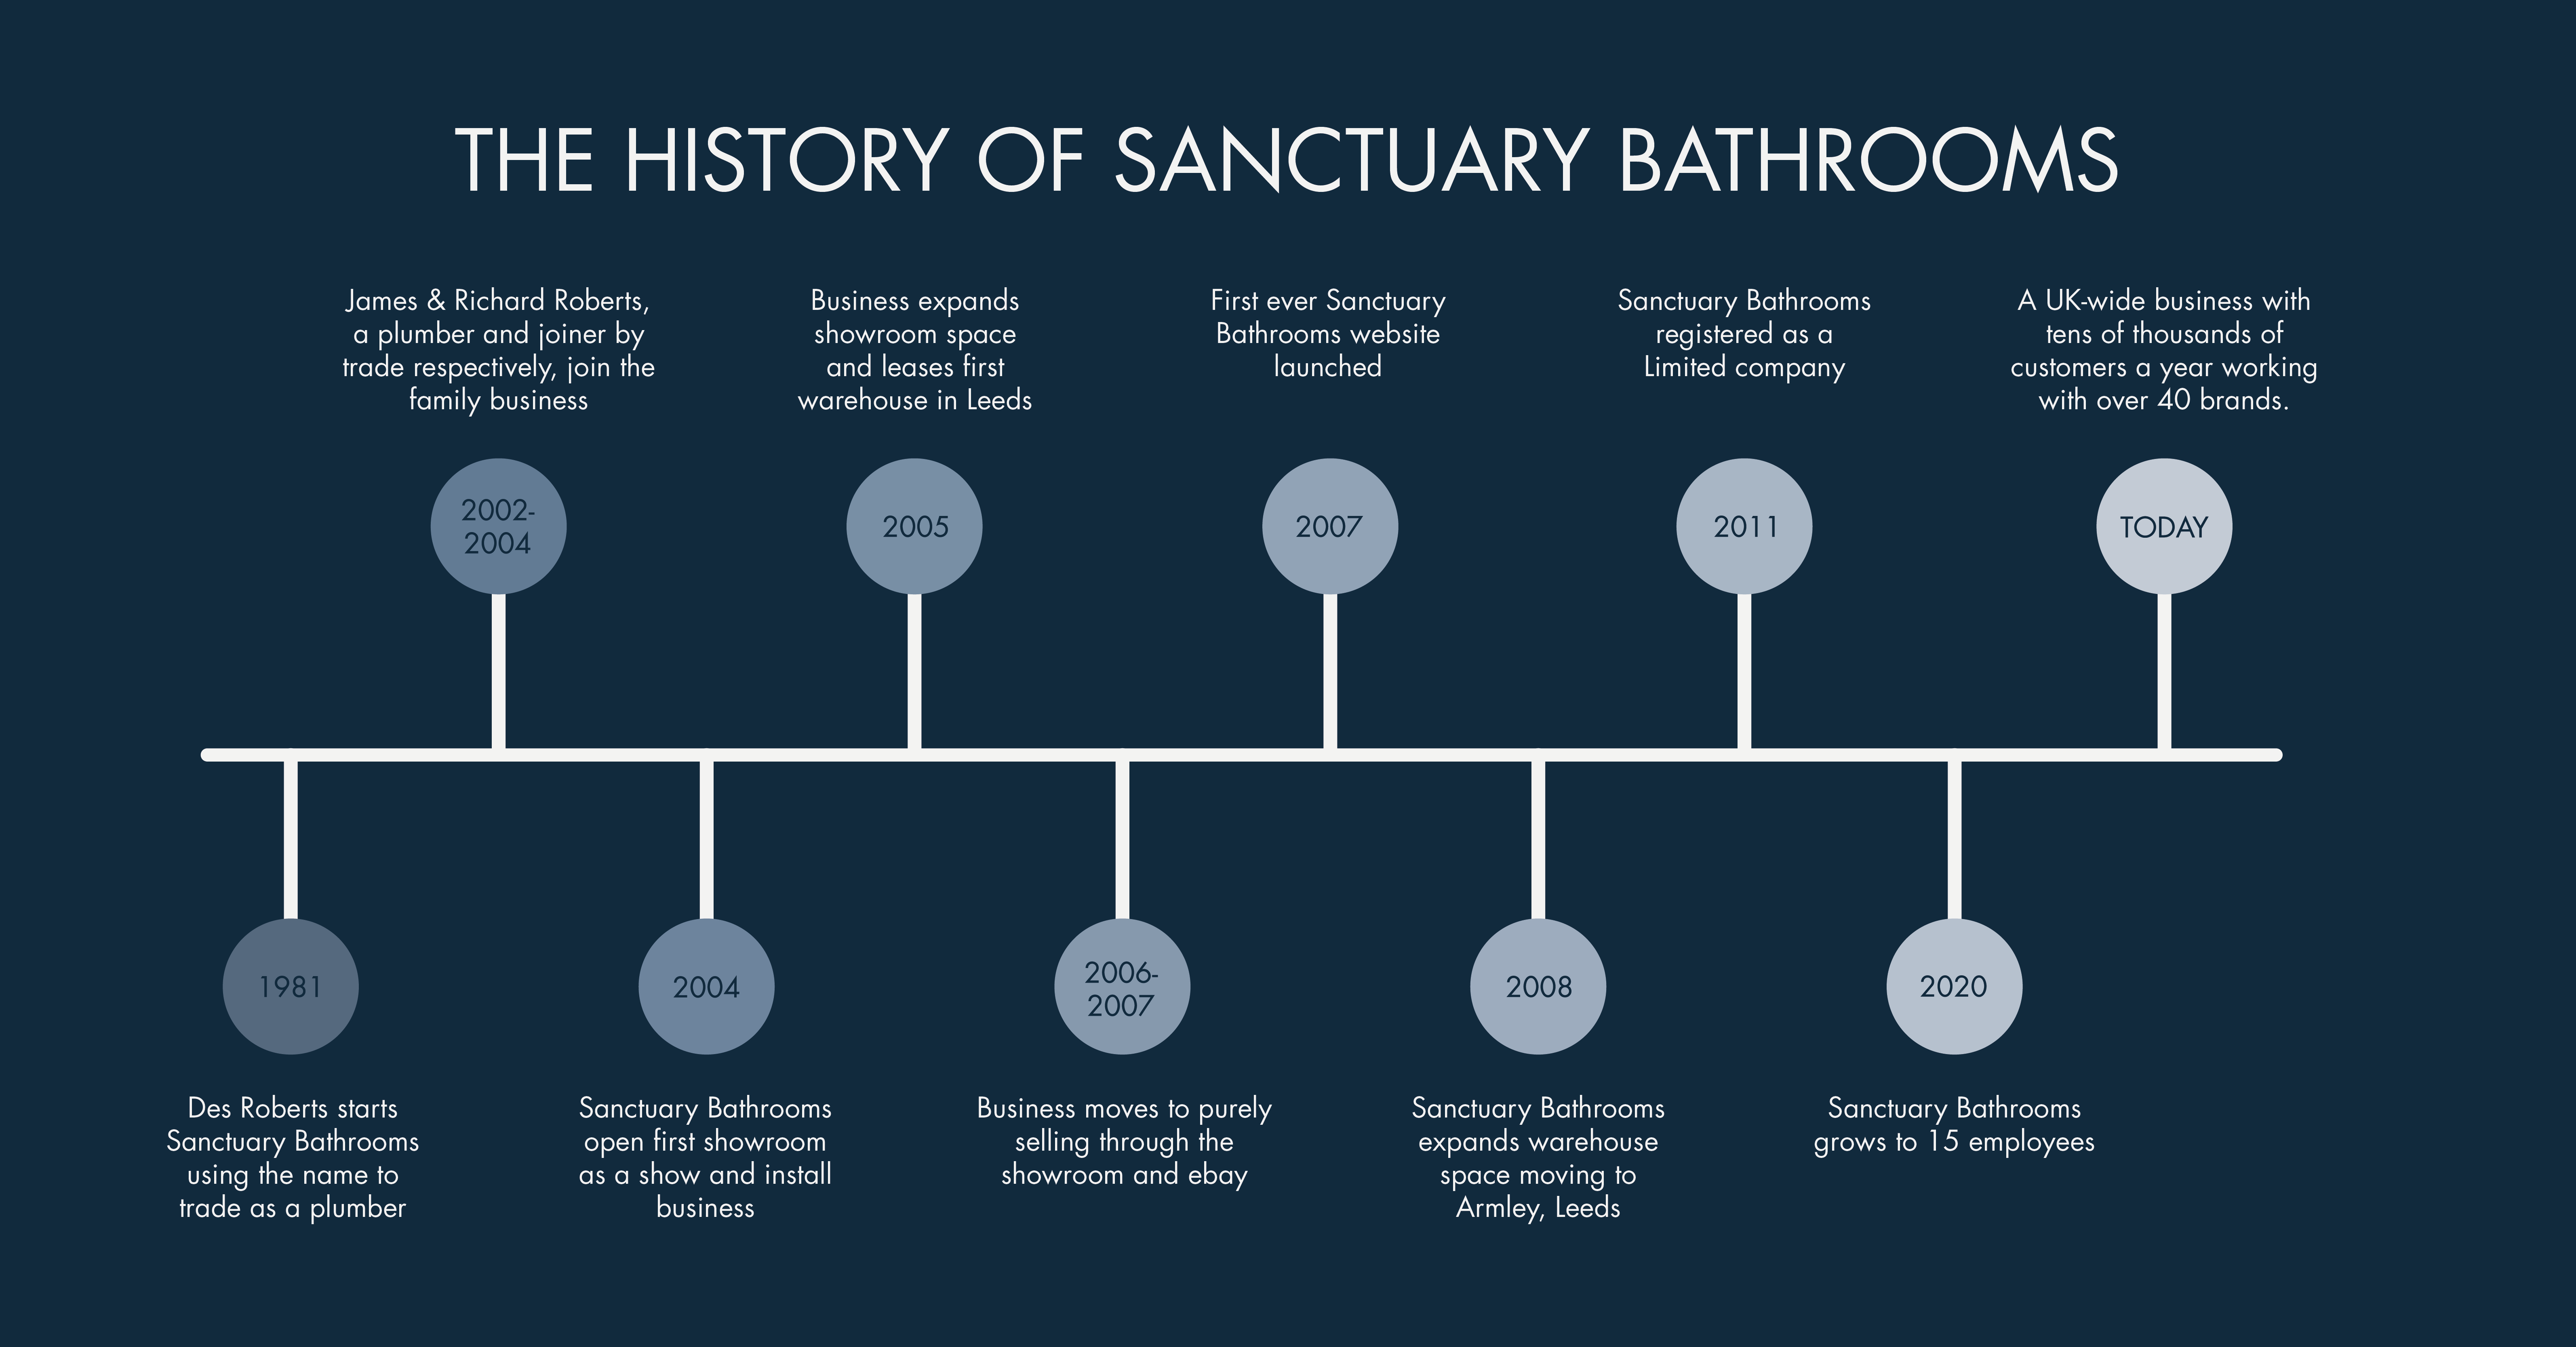 Image showing the history of Sanctuary Bathrooms in a timeline format on a blue background